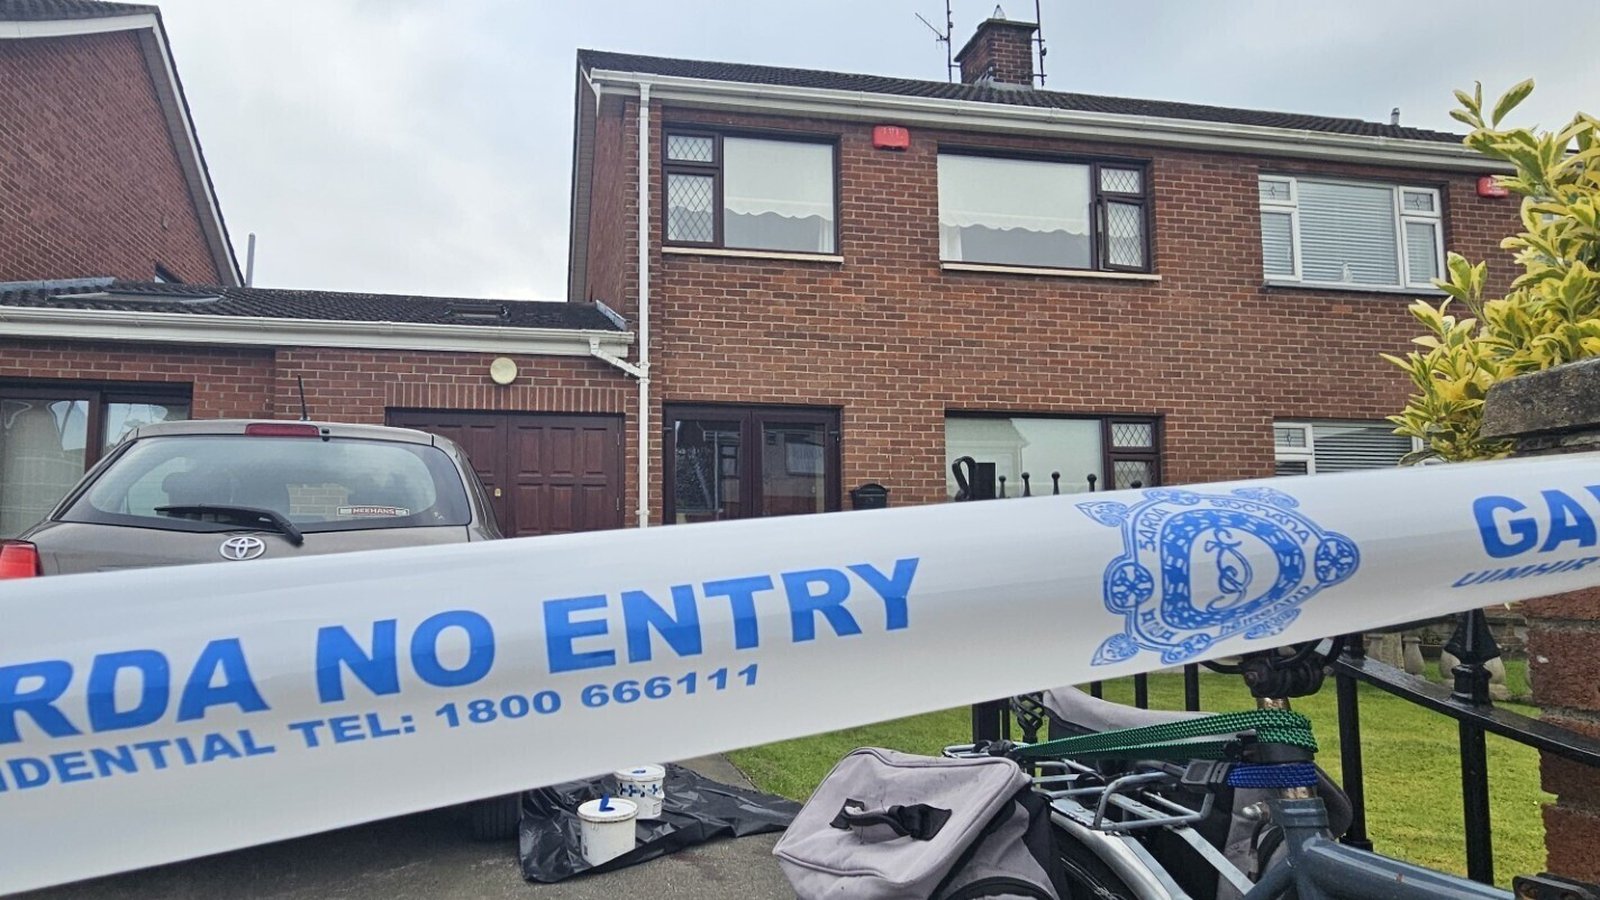 An elderly woman is in a serious condition in hospital following an alleged assault in Dundalk.